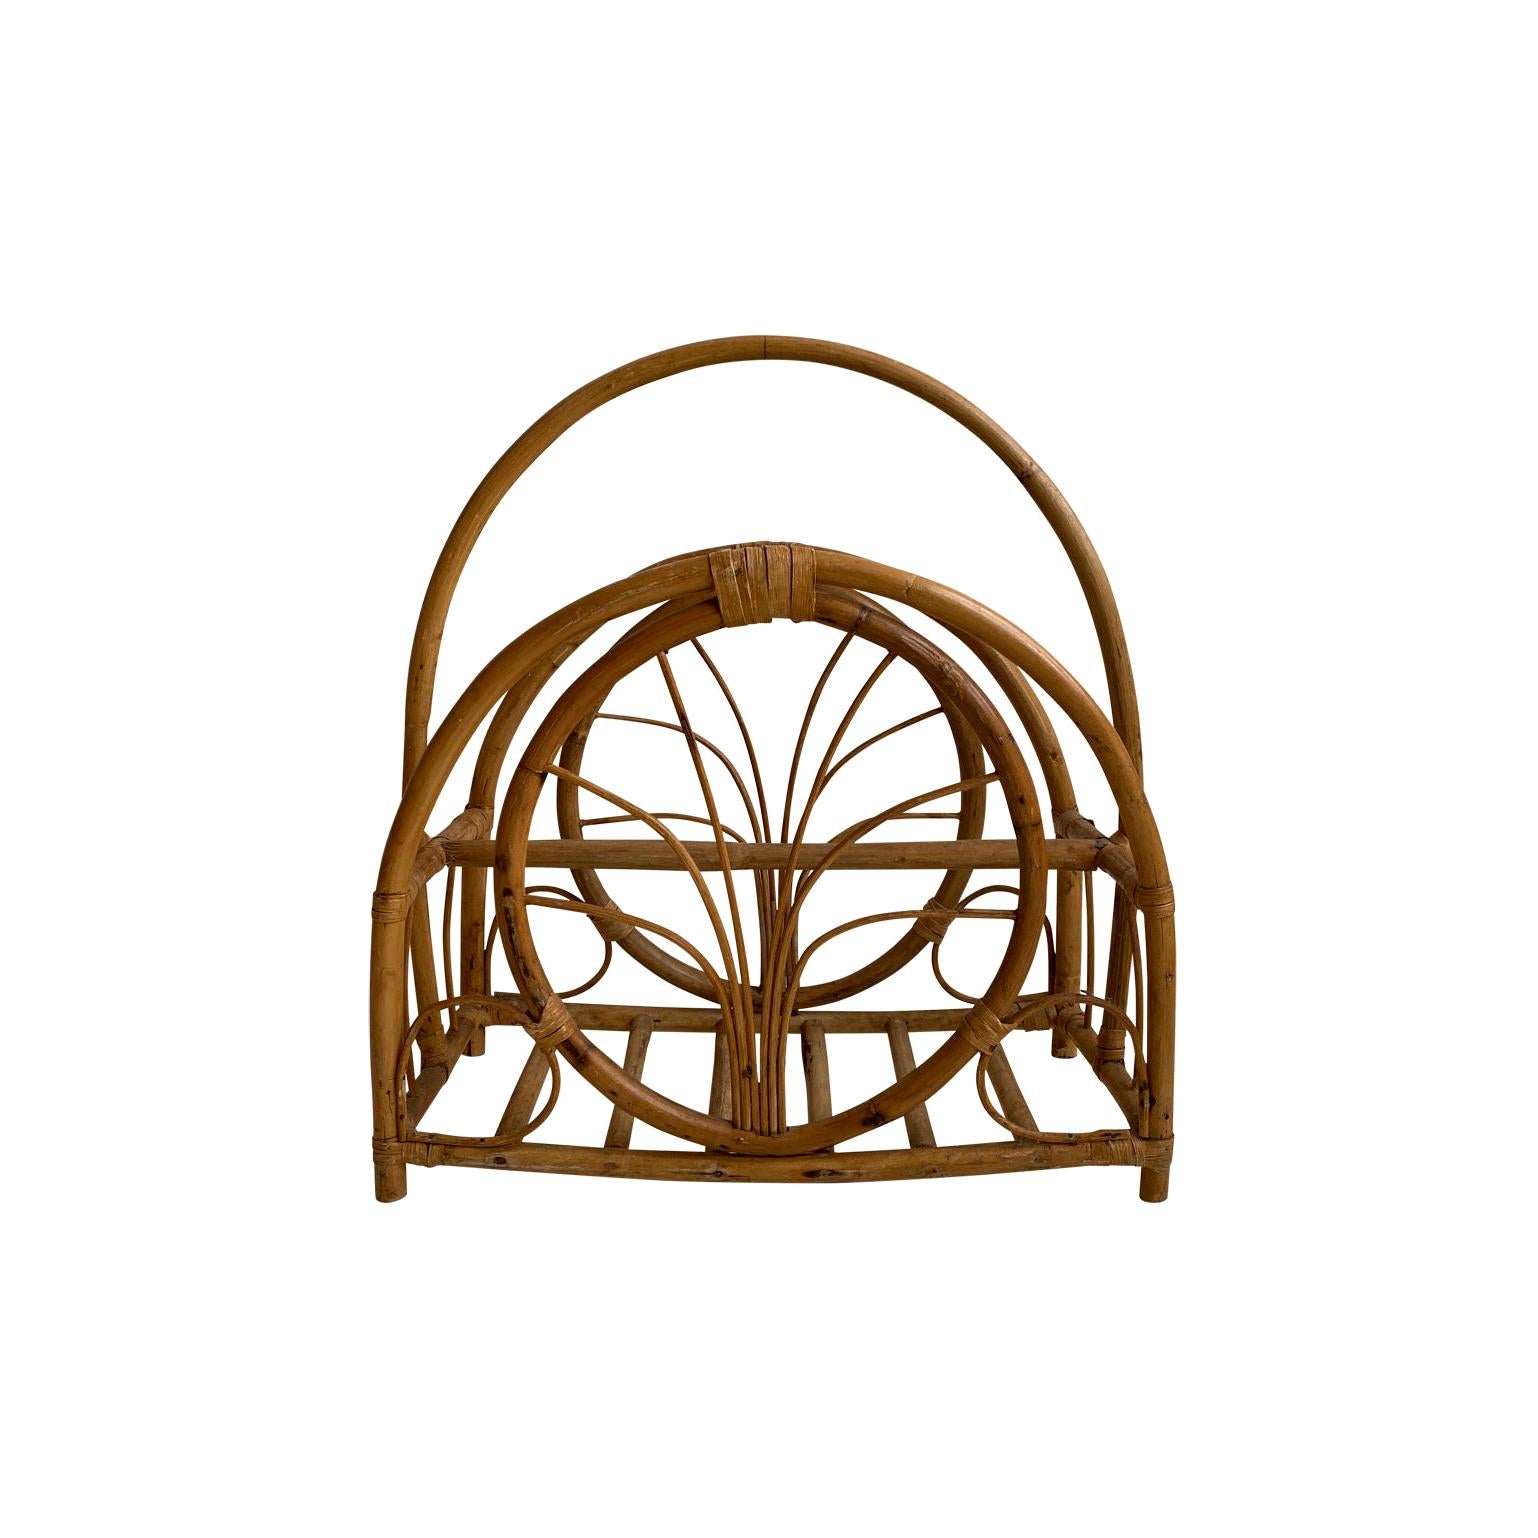 Midcentury Bamboo and Wicker Magazine Holder For Sale